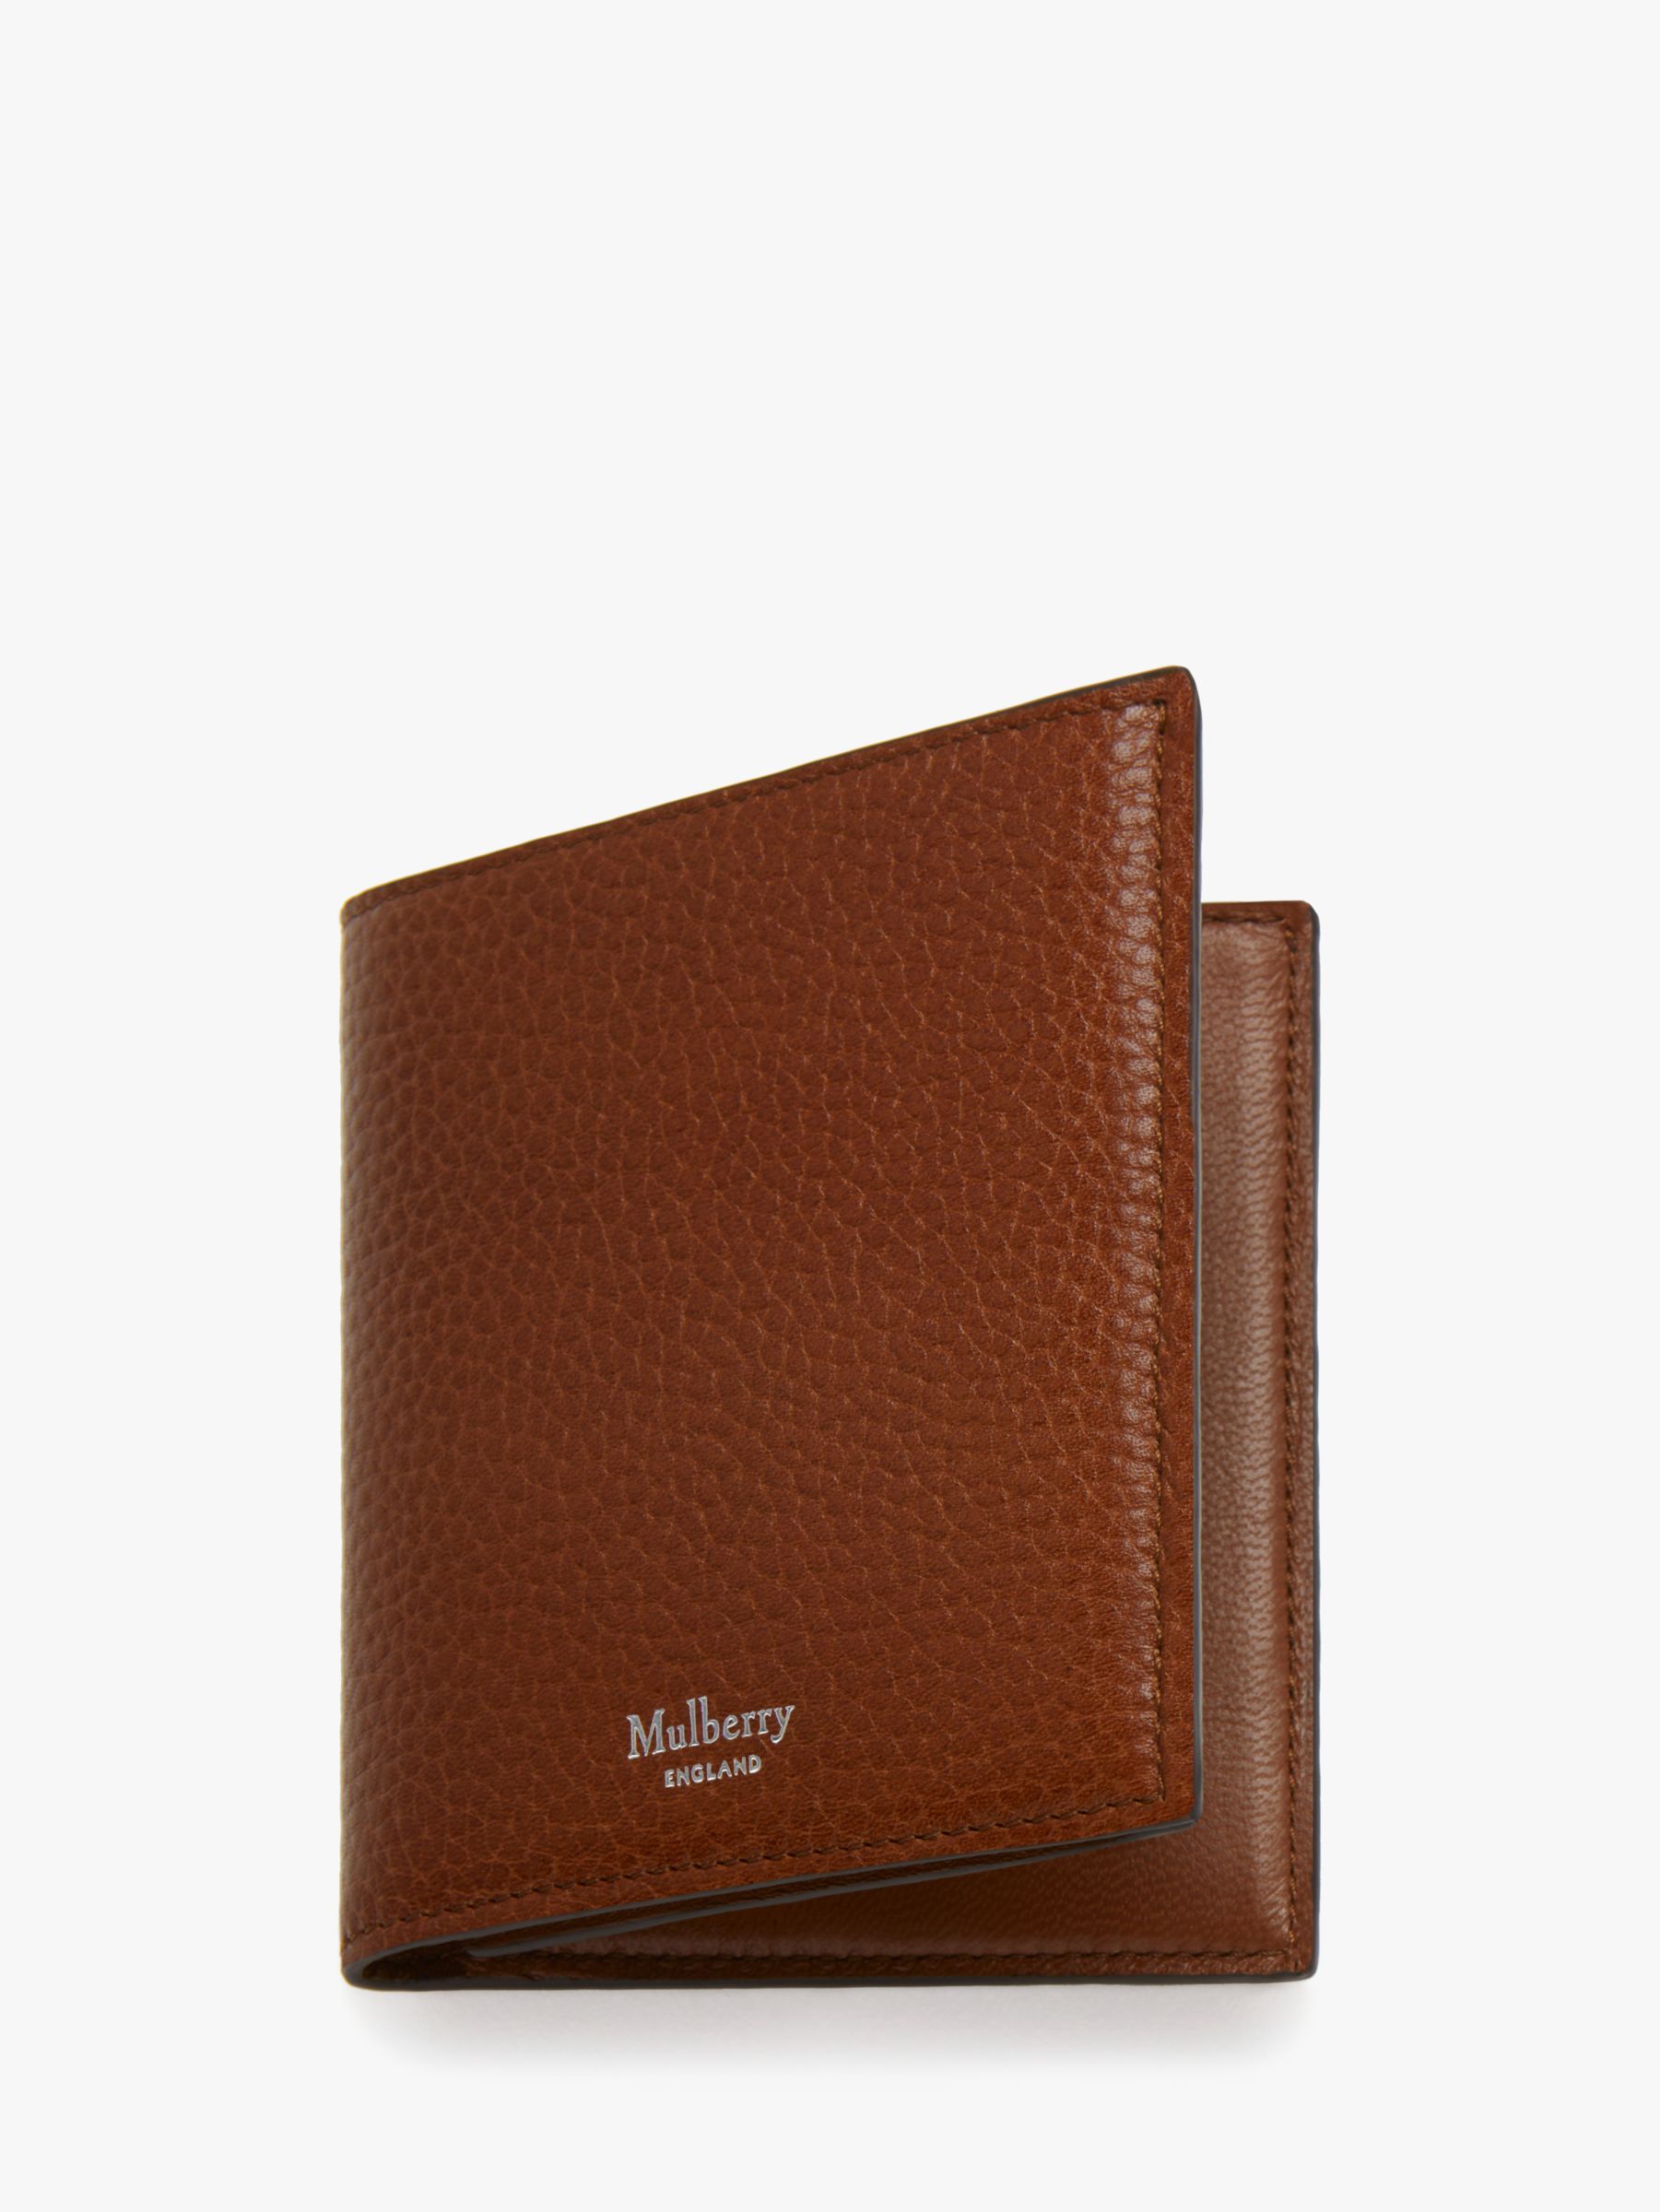 Mulberry Grain Veg Tanned Leather Trifold Wallet, Oak at John Lewis ...